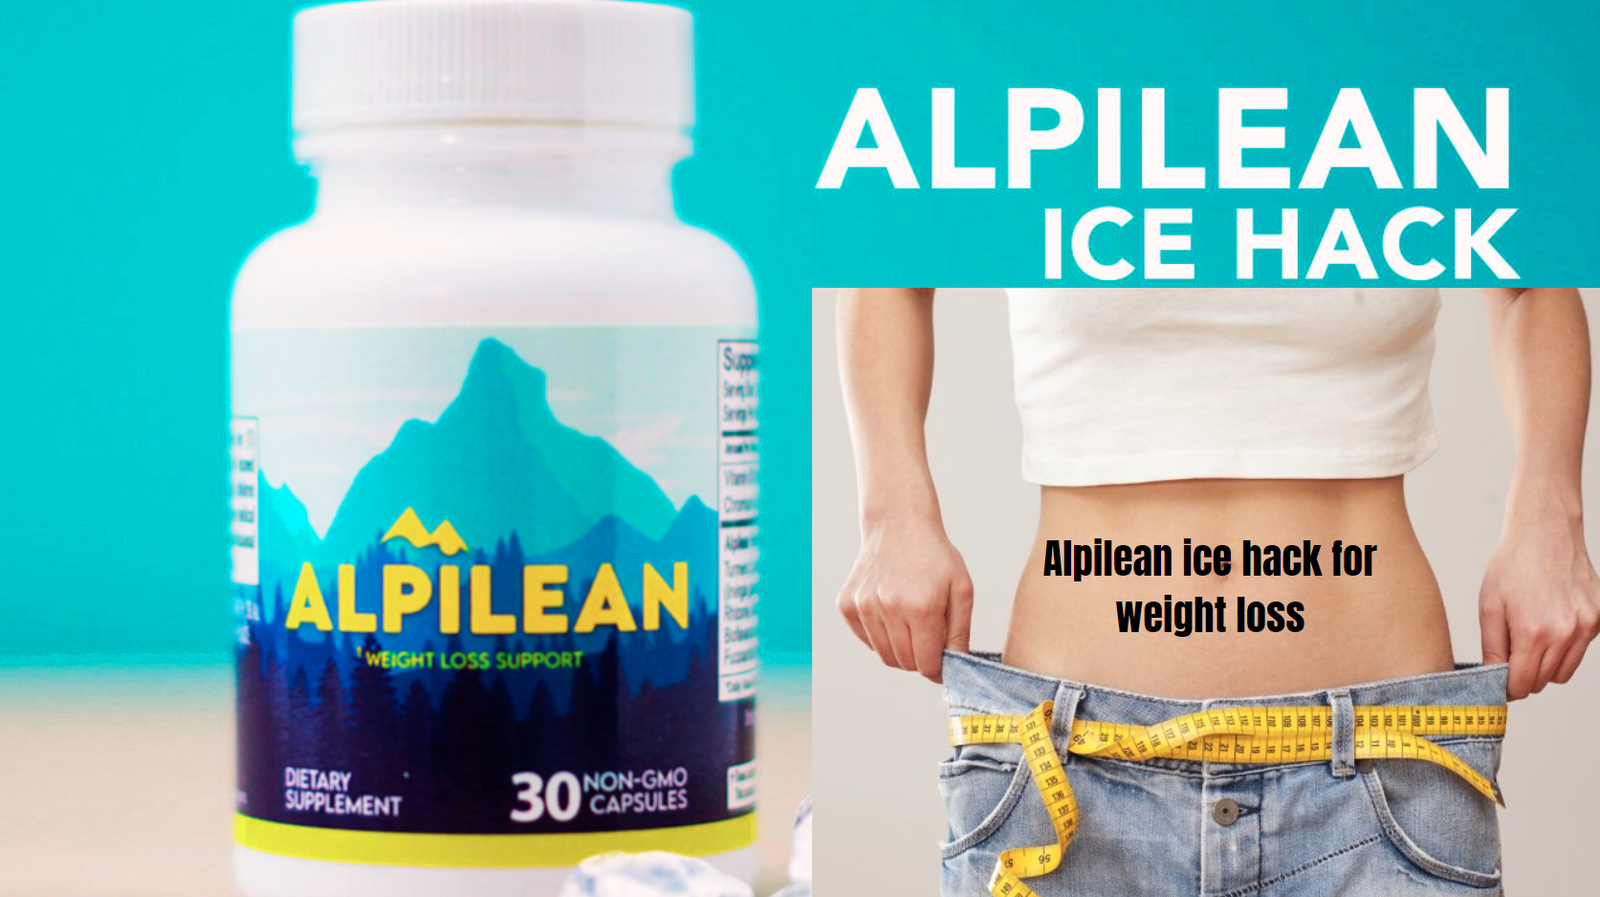 What You Need to Know   Alpilean ice hack for weight loss